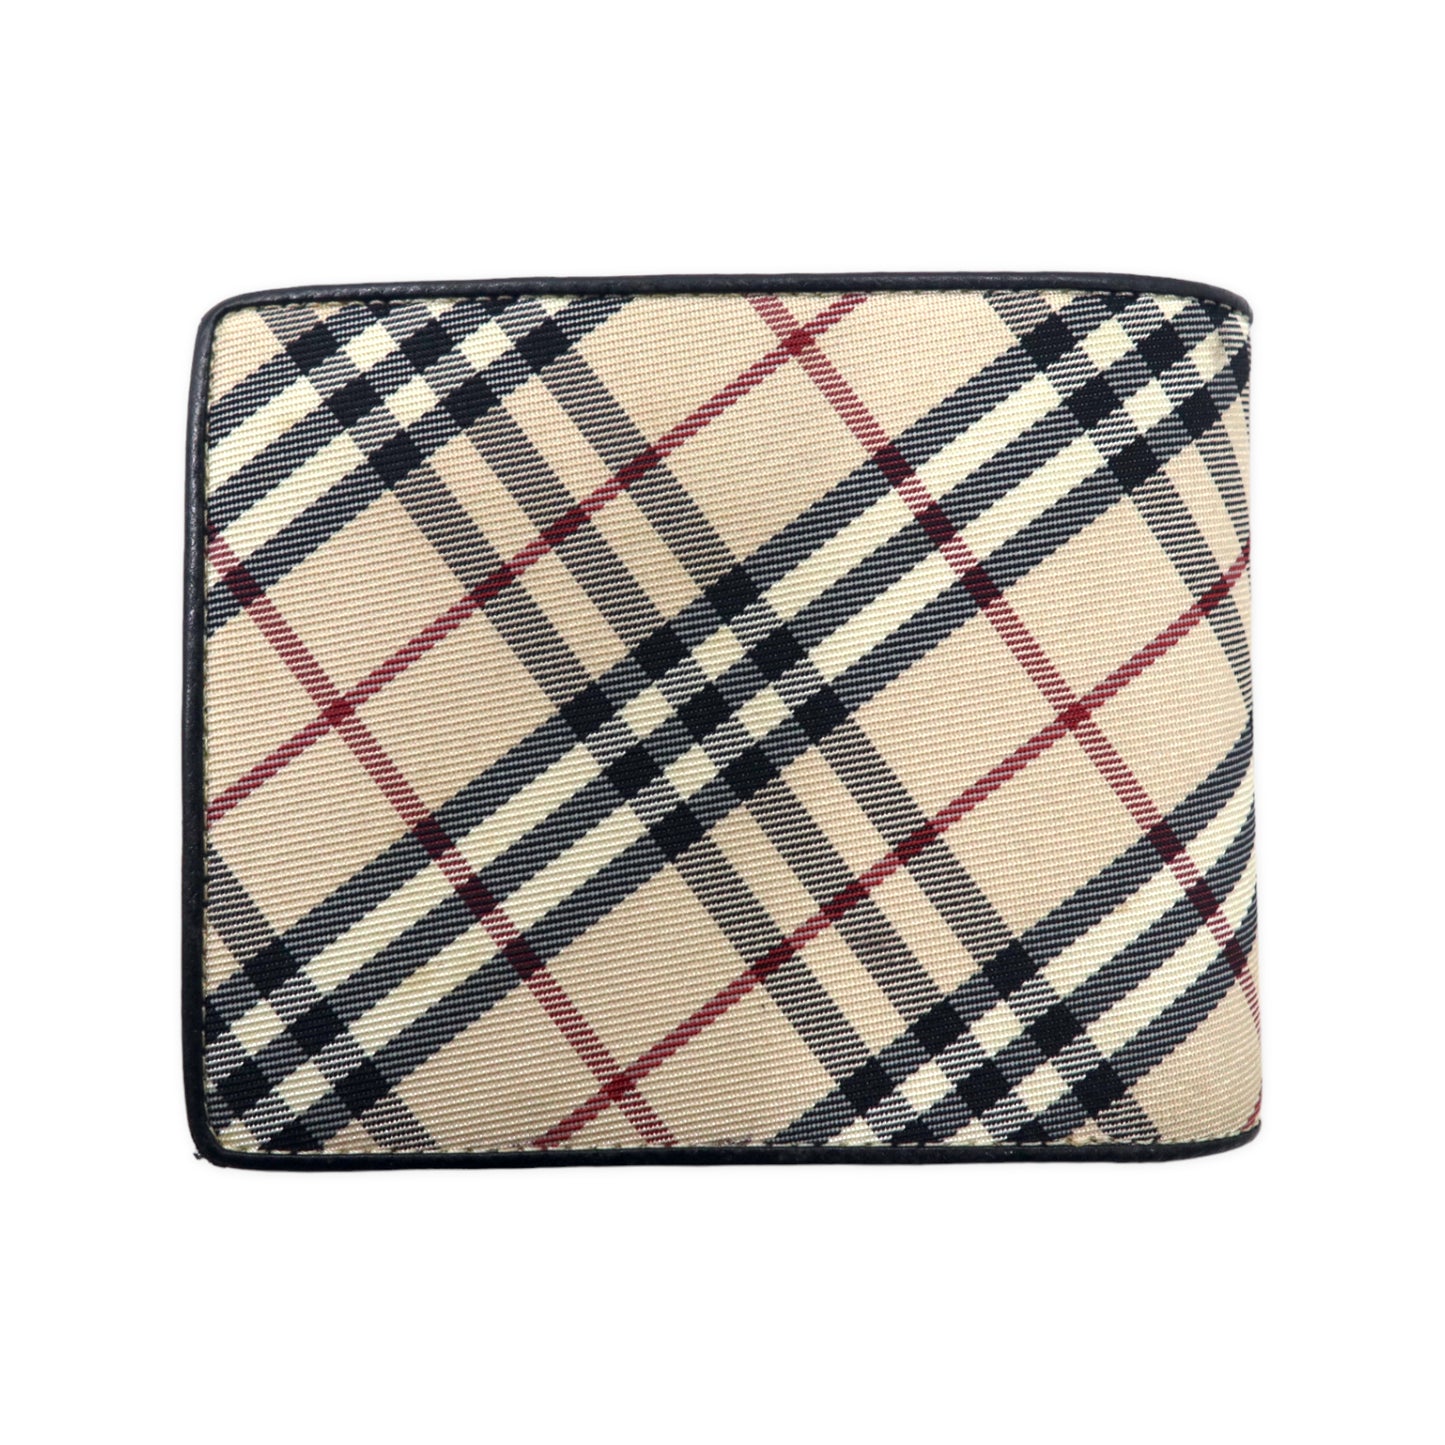 BURBERRY CHECKED FOLDING WALLET Compact wallet beige black nylon